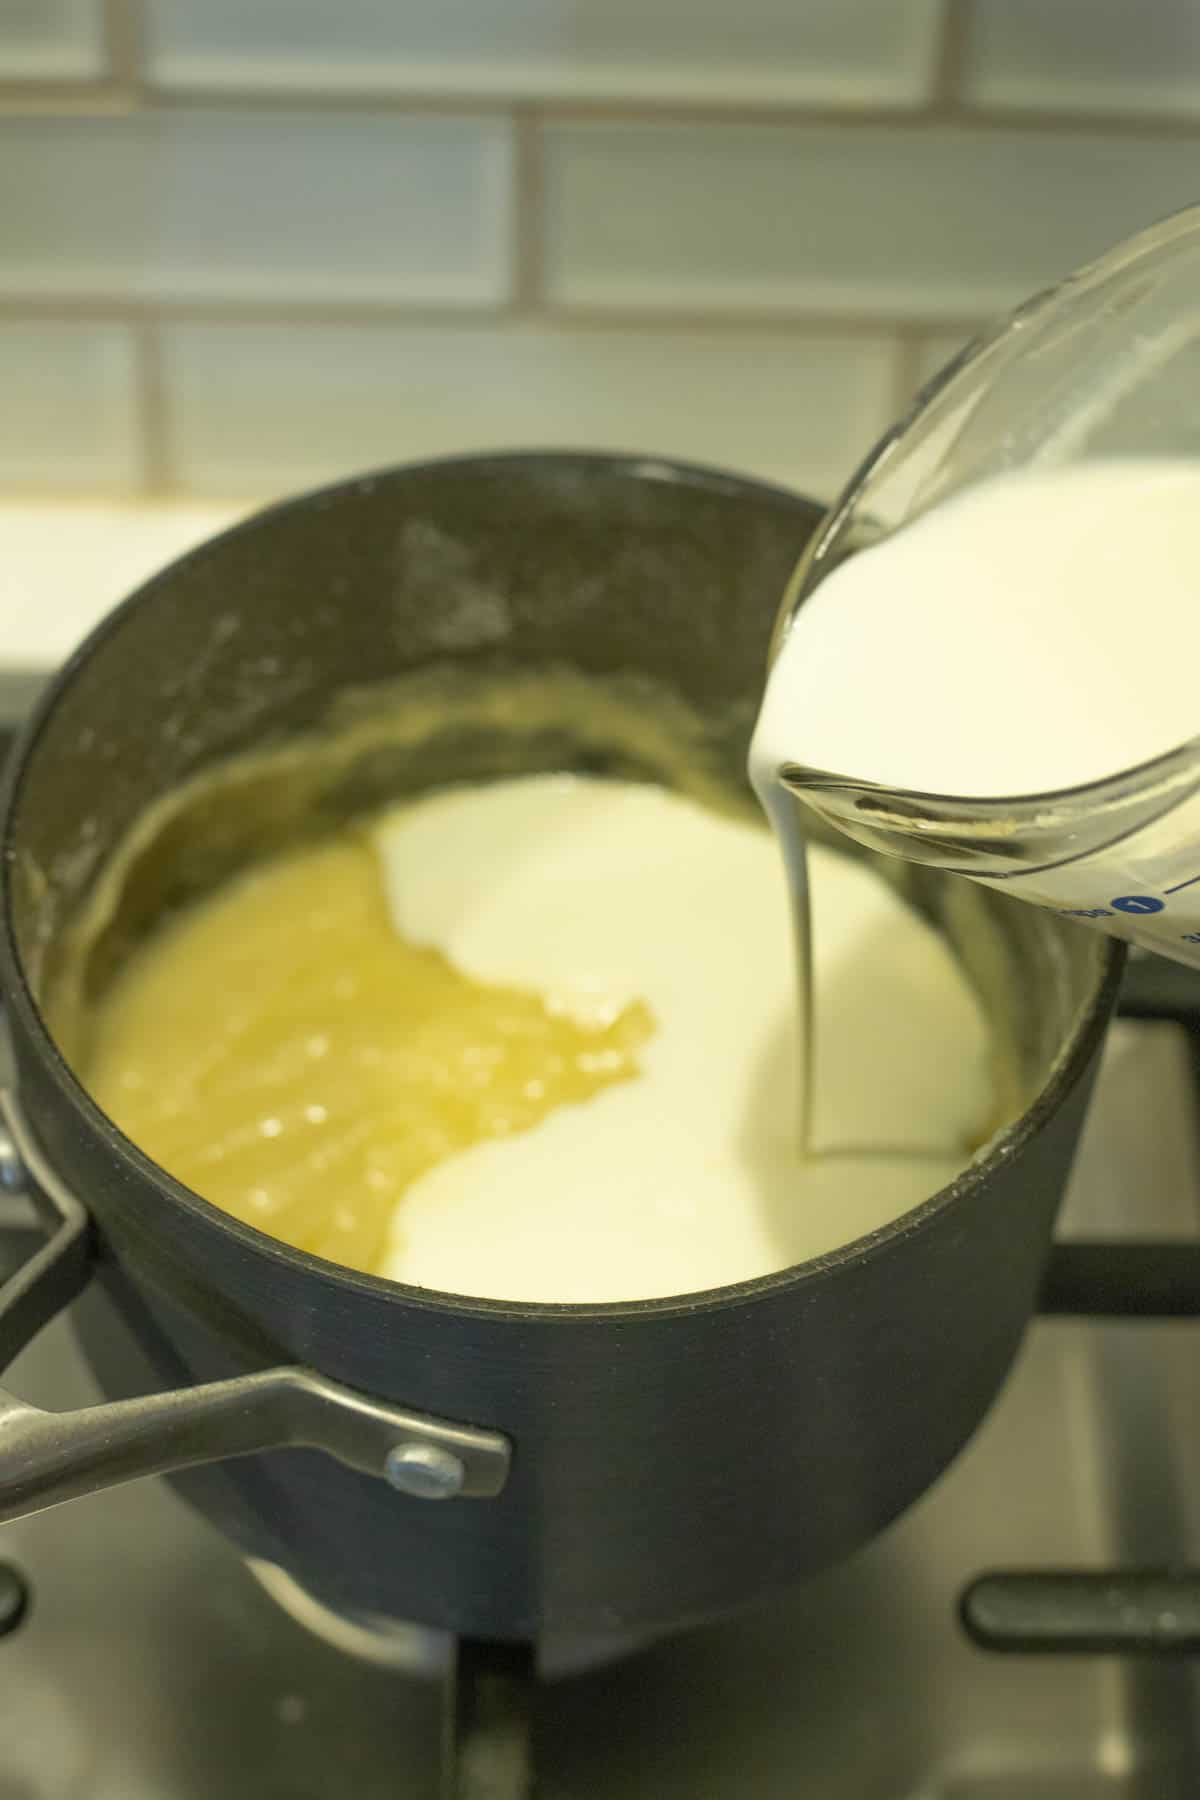 Cream being poured into saucepan.